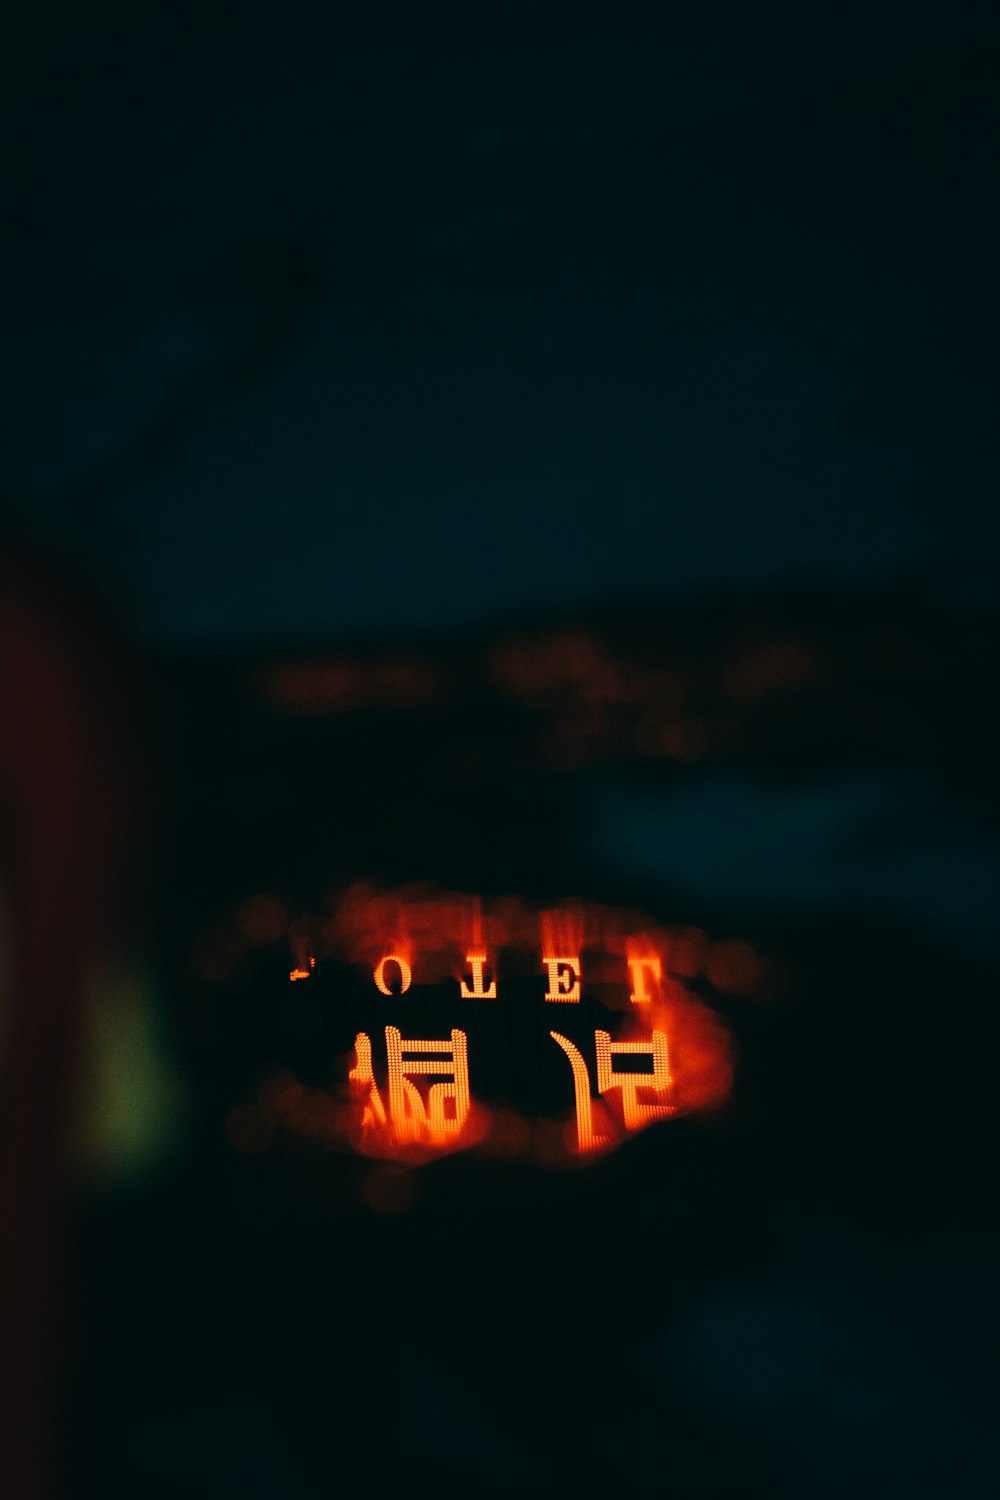 a close up of a speed limit sign at night